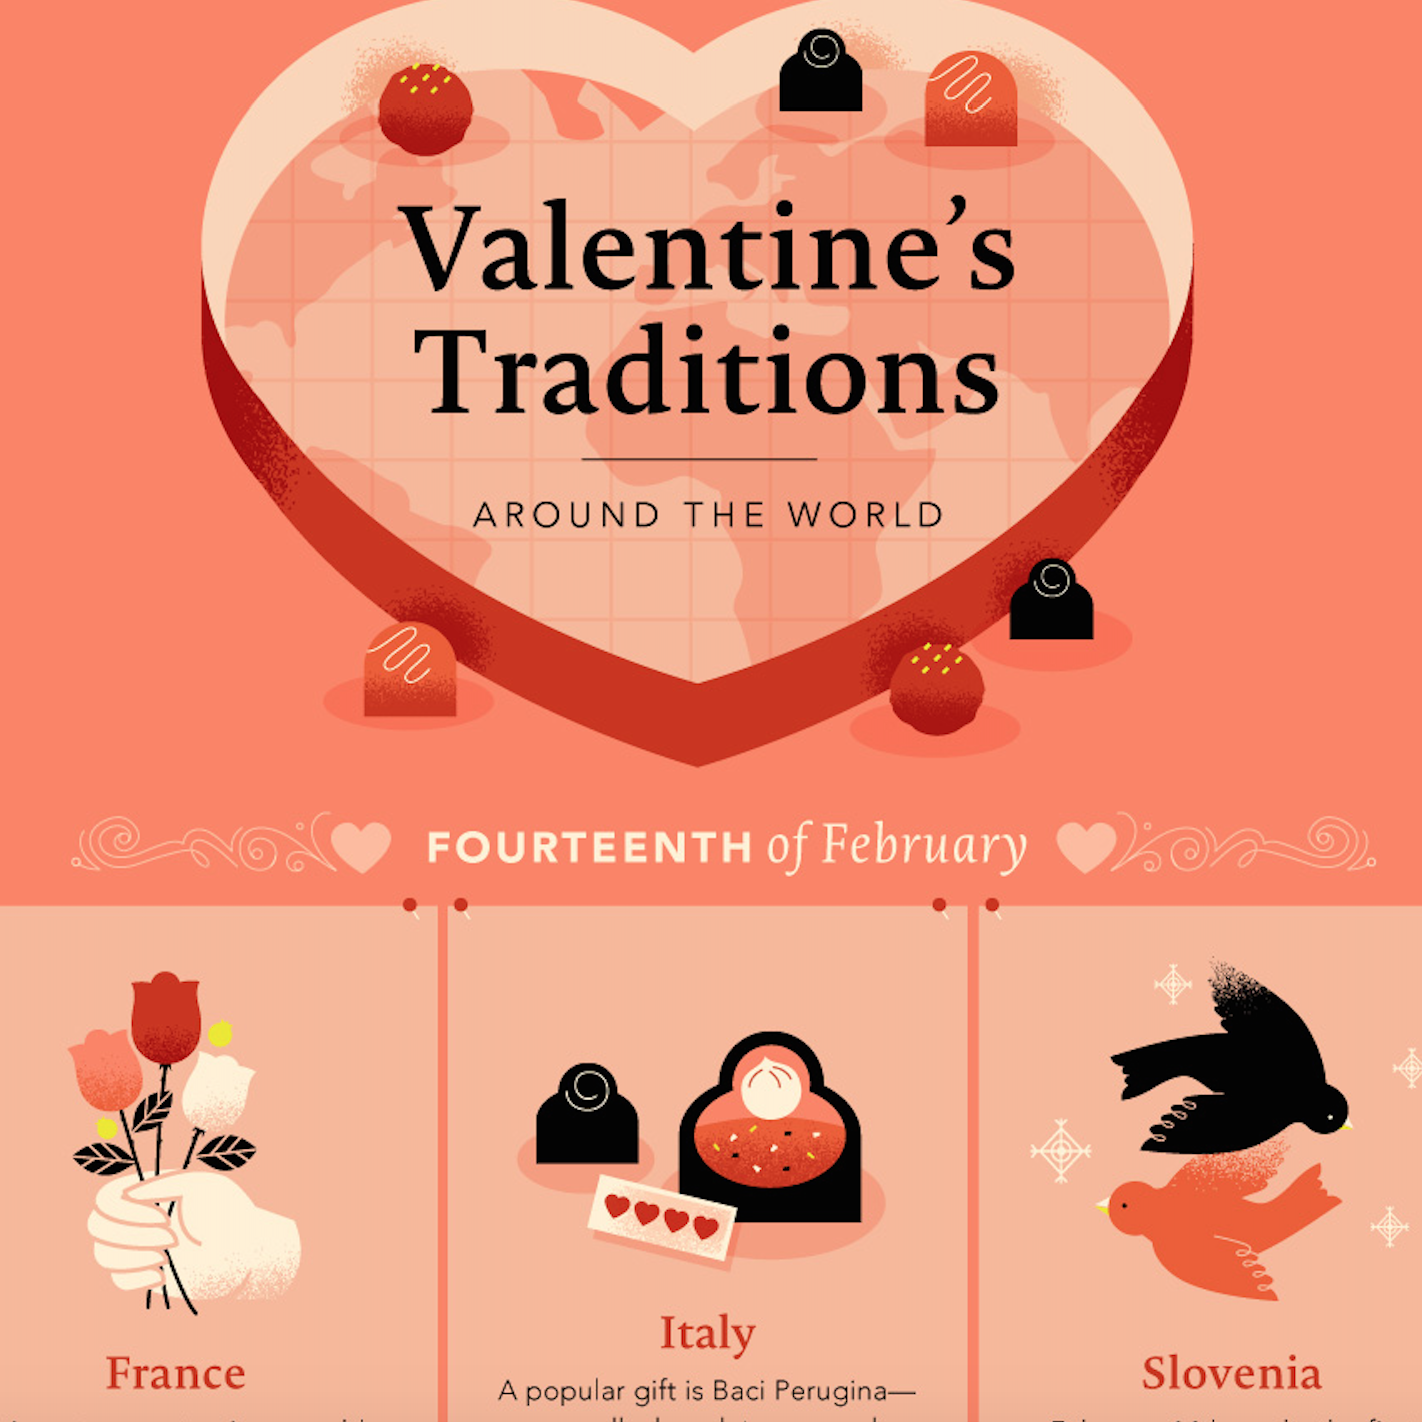 Valentines Traditions From Around The World Infographic